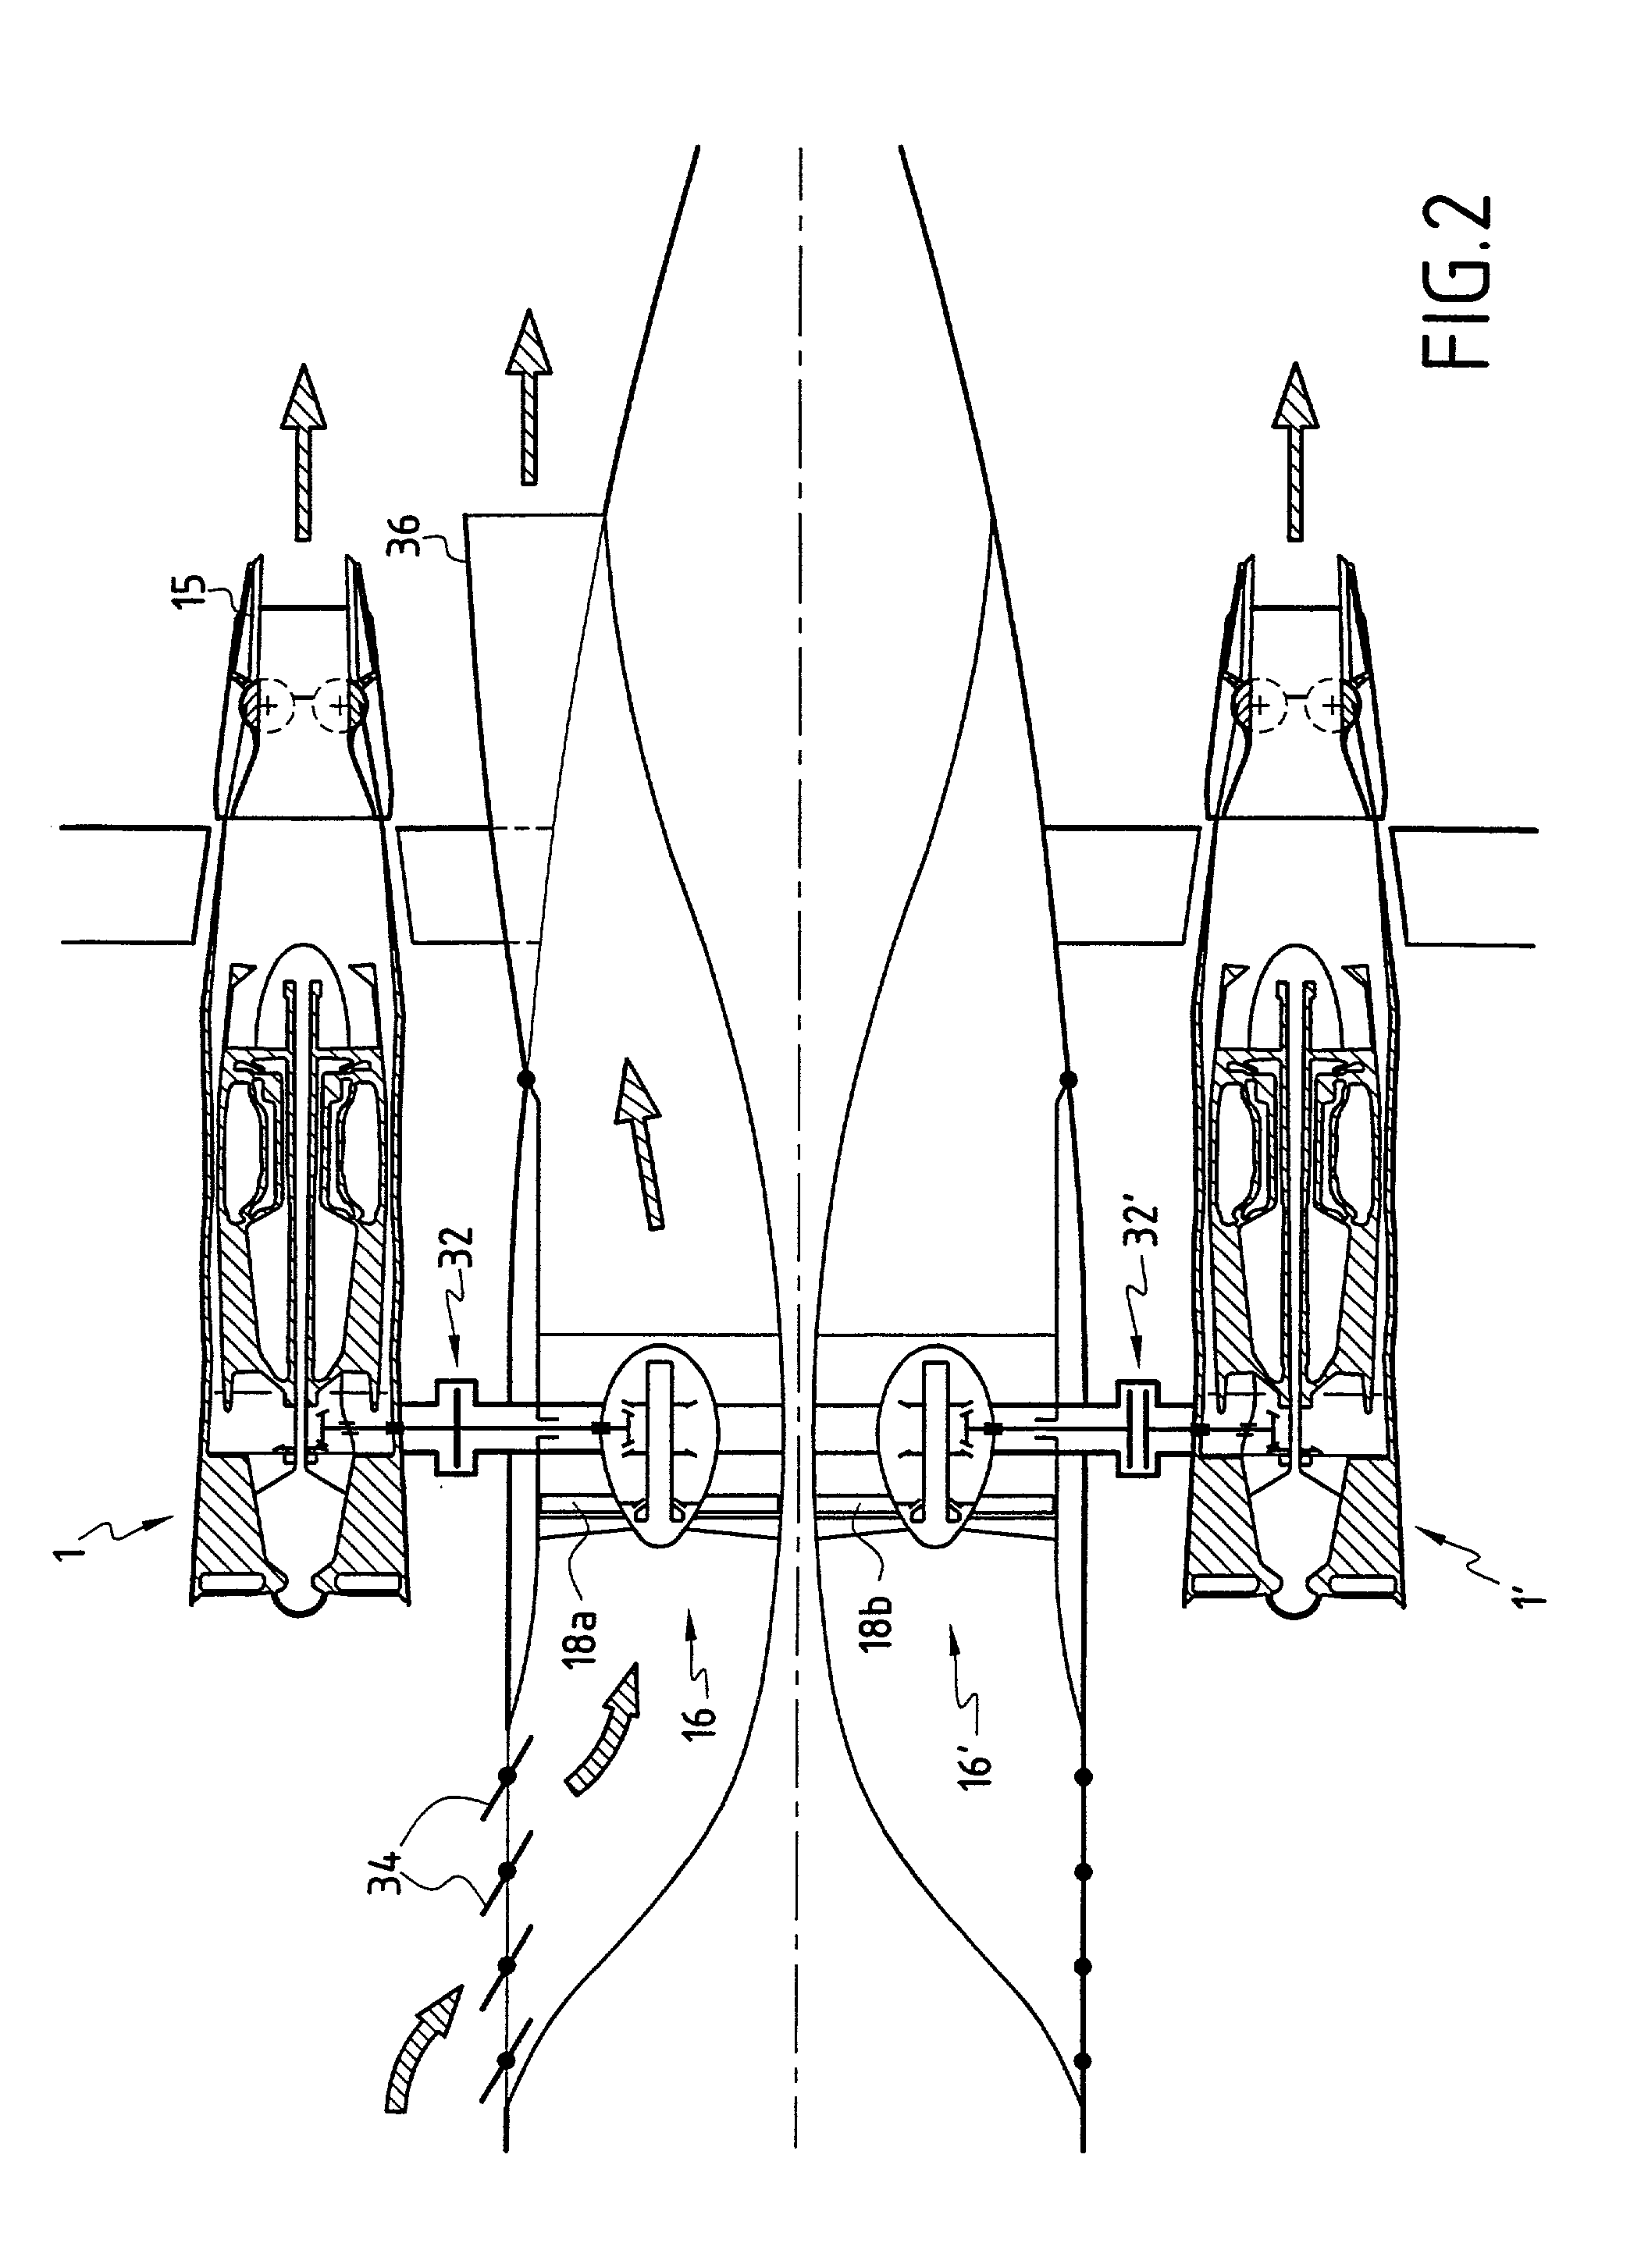 Variable cycle propulsion system with mechanical transmission for a supersonic airplane